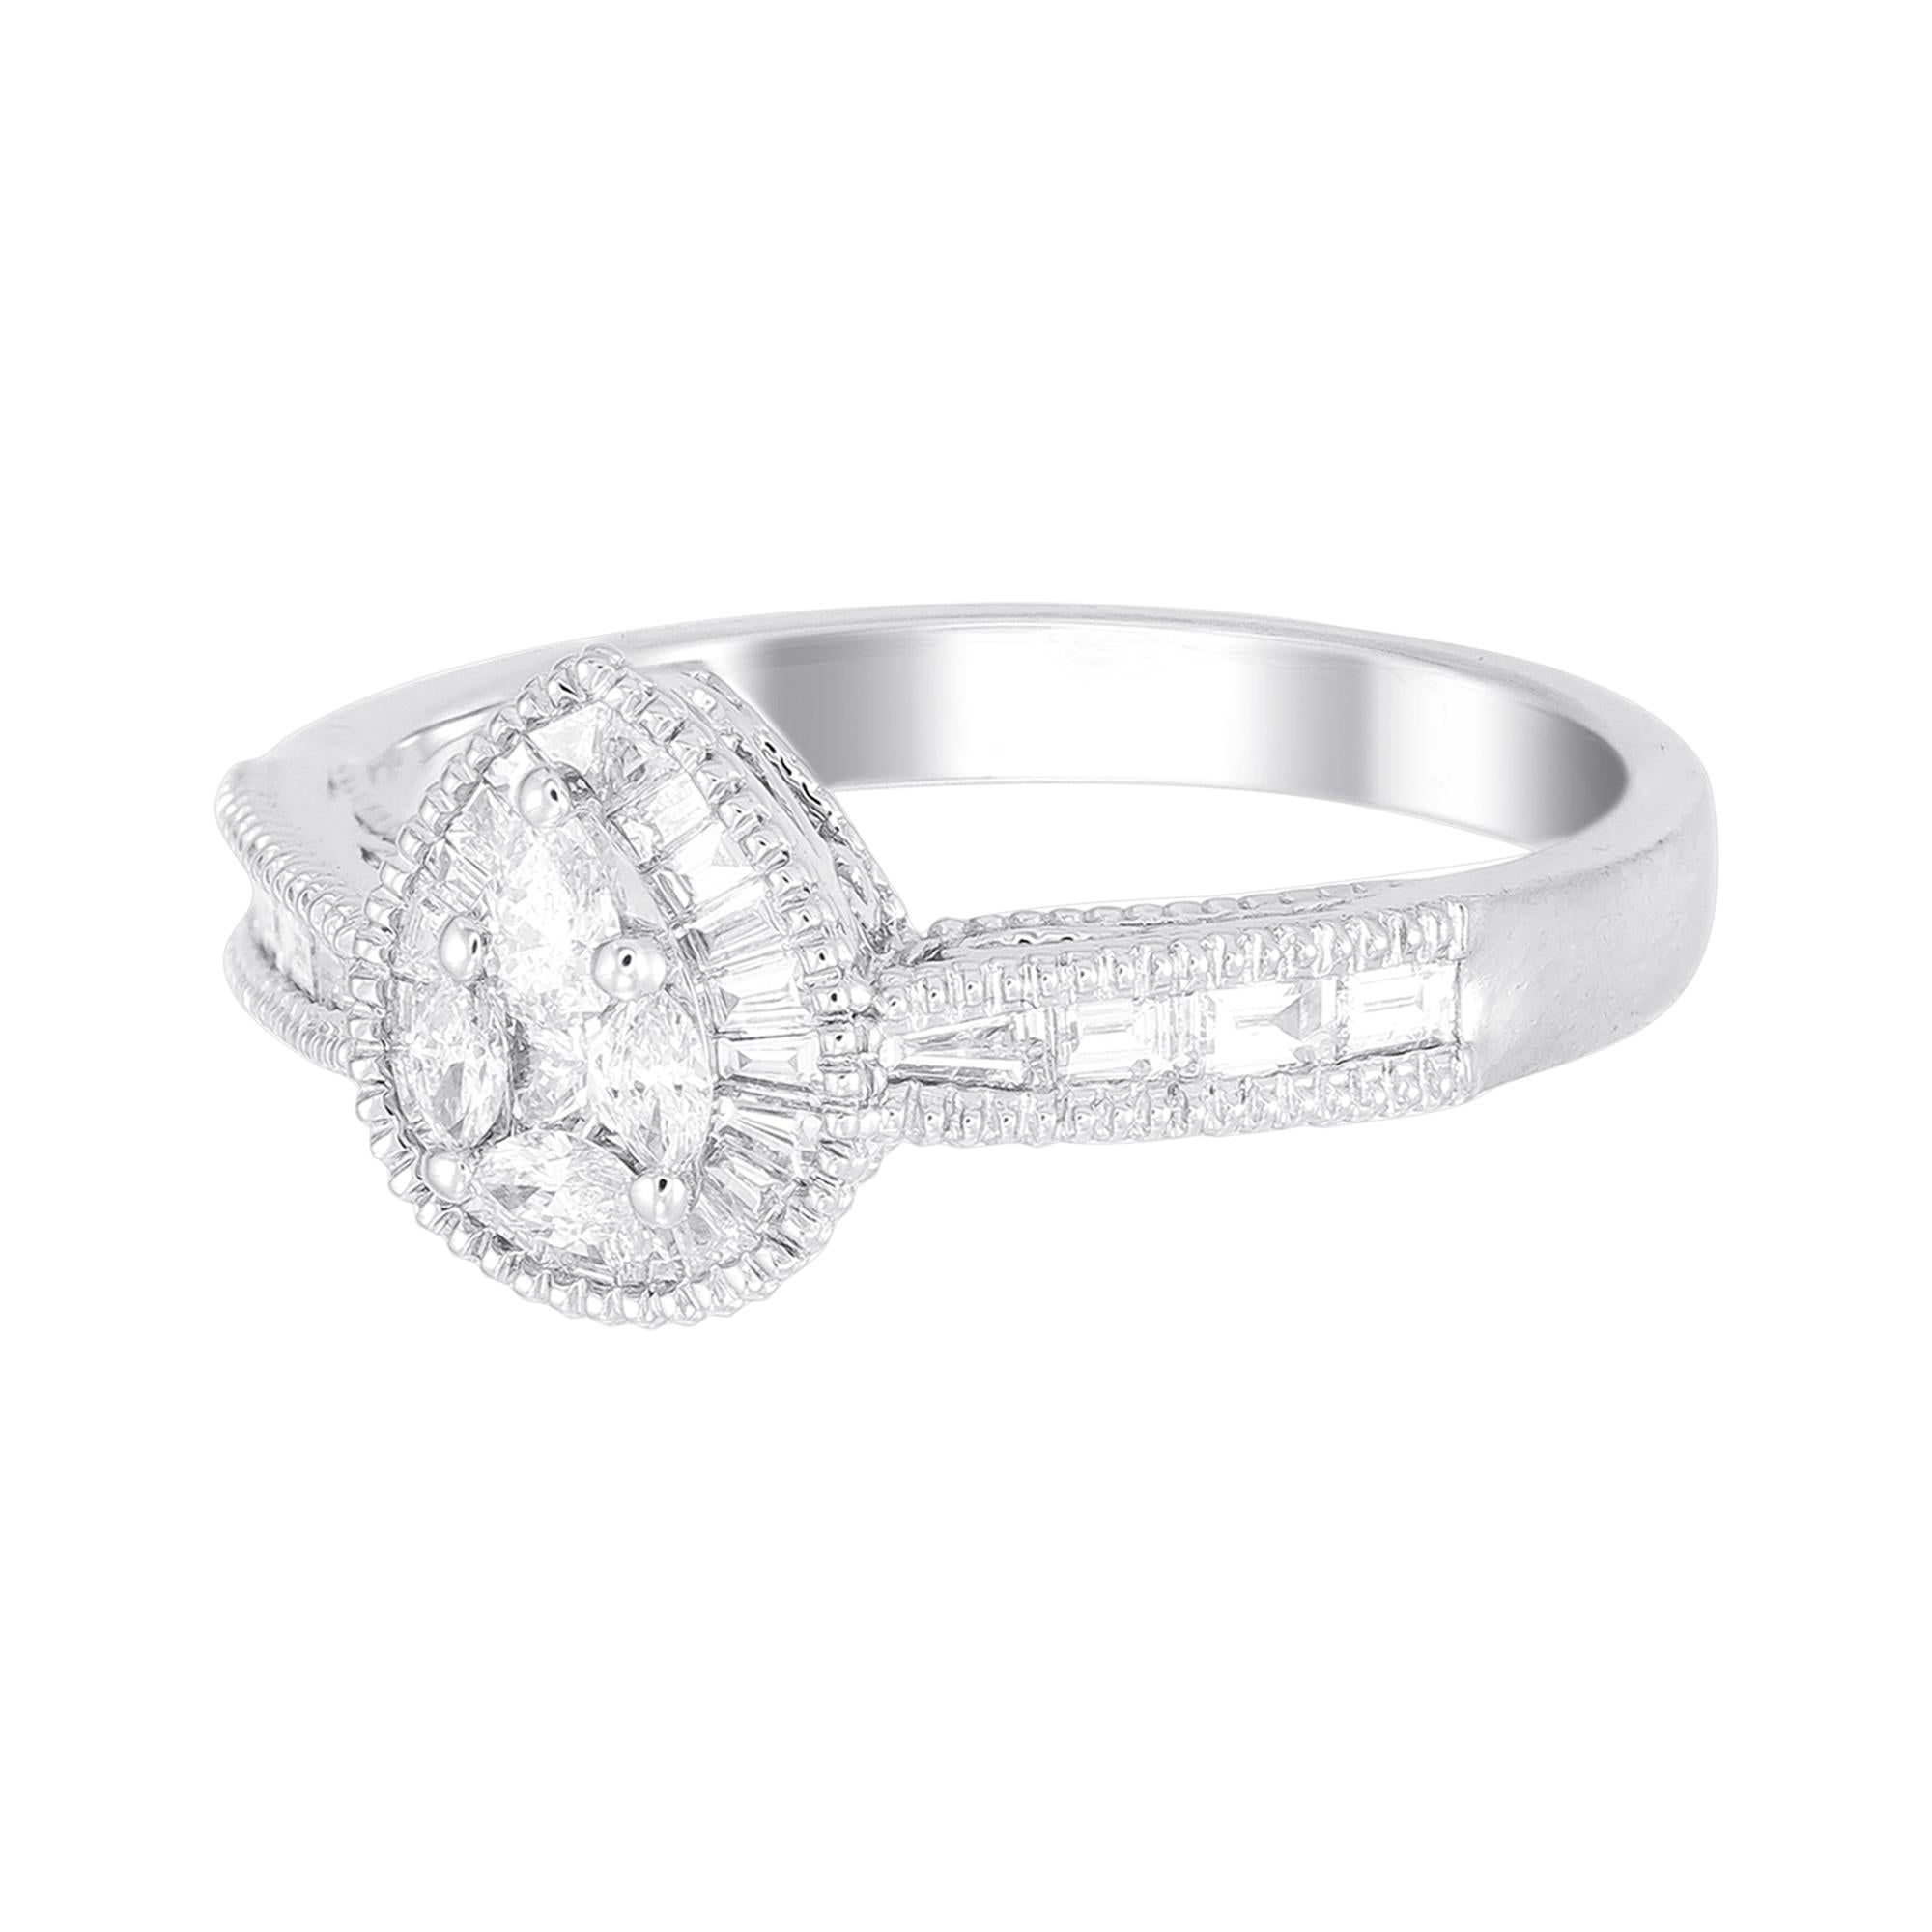 This 18K White Gold cocktail ring features a luscious Pear shape White Diamond Illusion, accentuated by a halo of Baguette diamonds. Combine with glamorous outfits for a show-stopping effect. Each diamond hand-selected by our experts for its